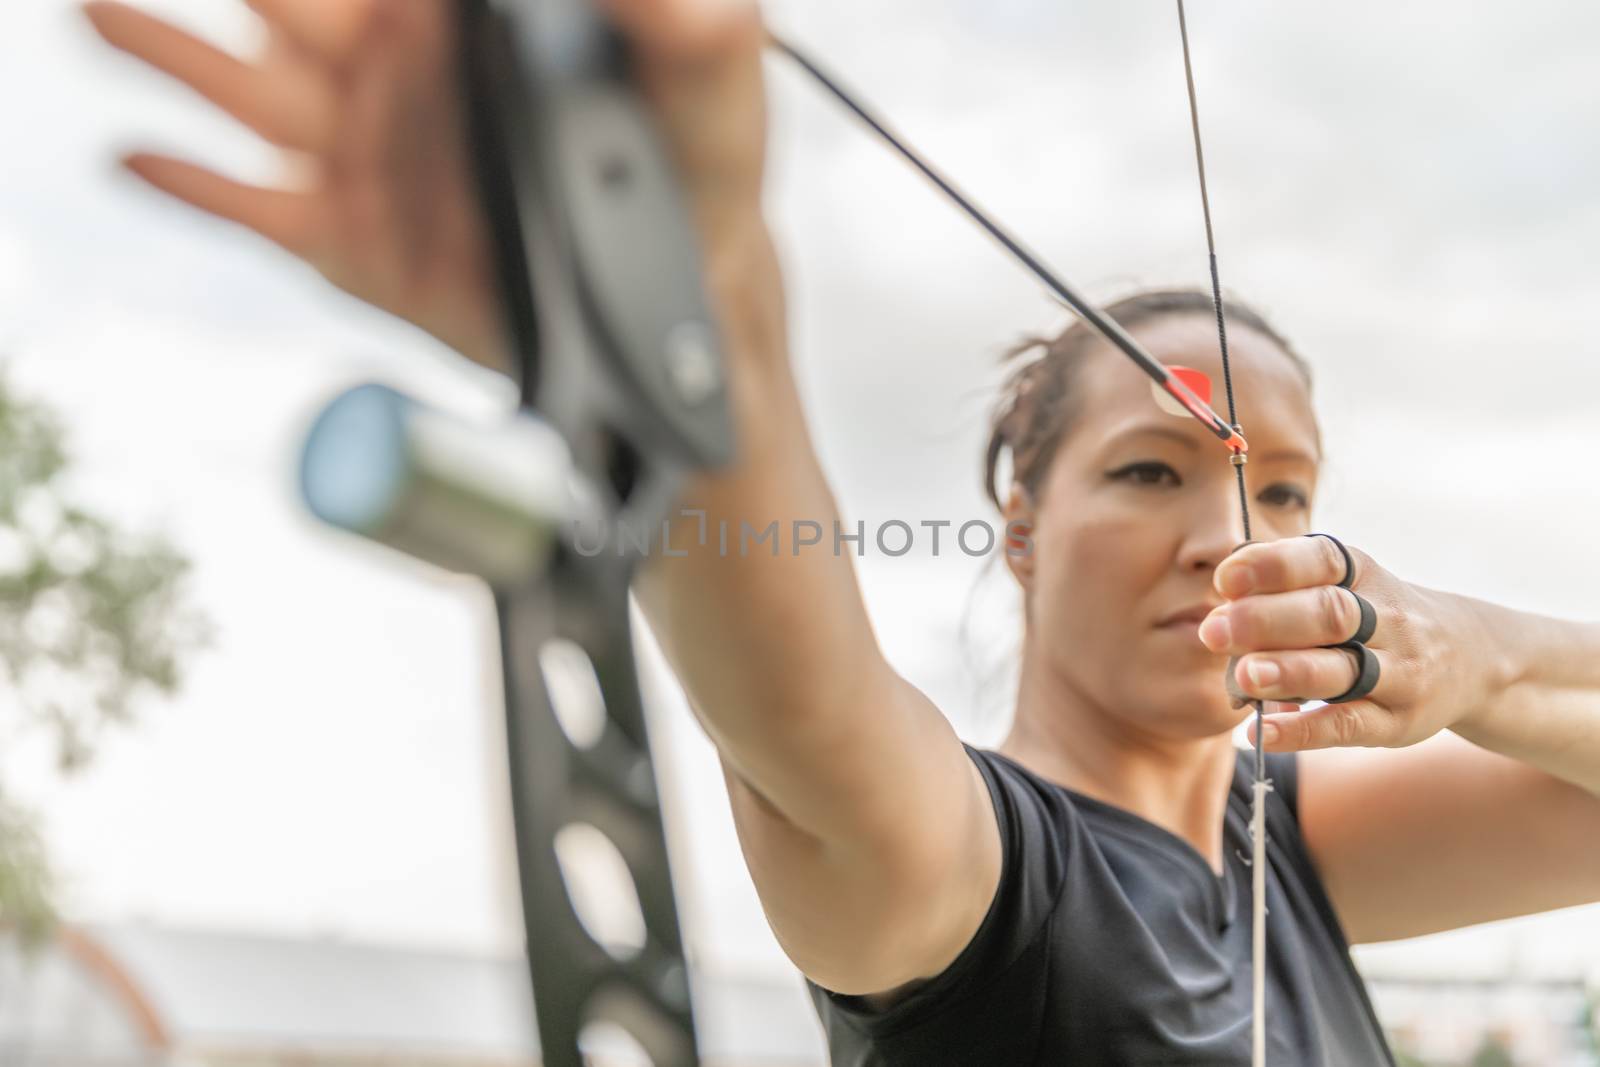 Deploy the arrow to shoot from the archery bow by Edophoto